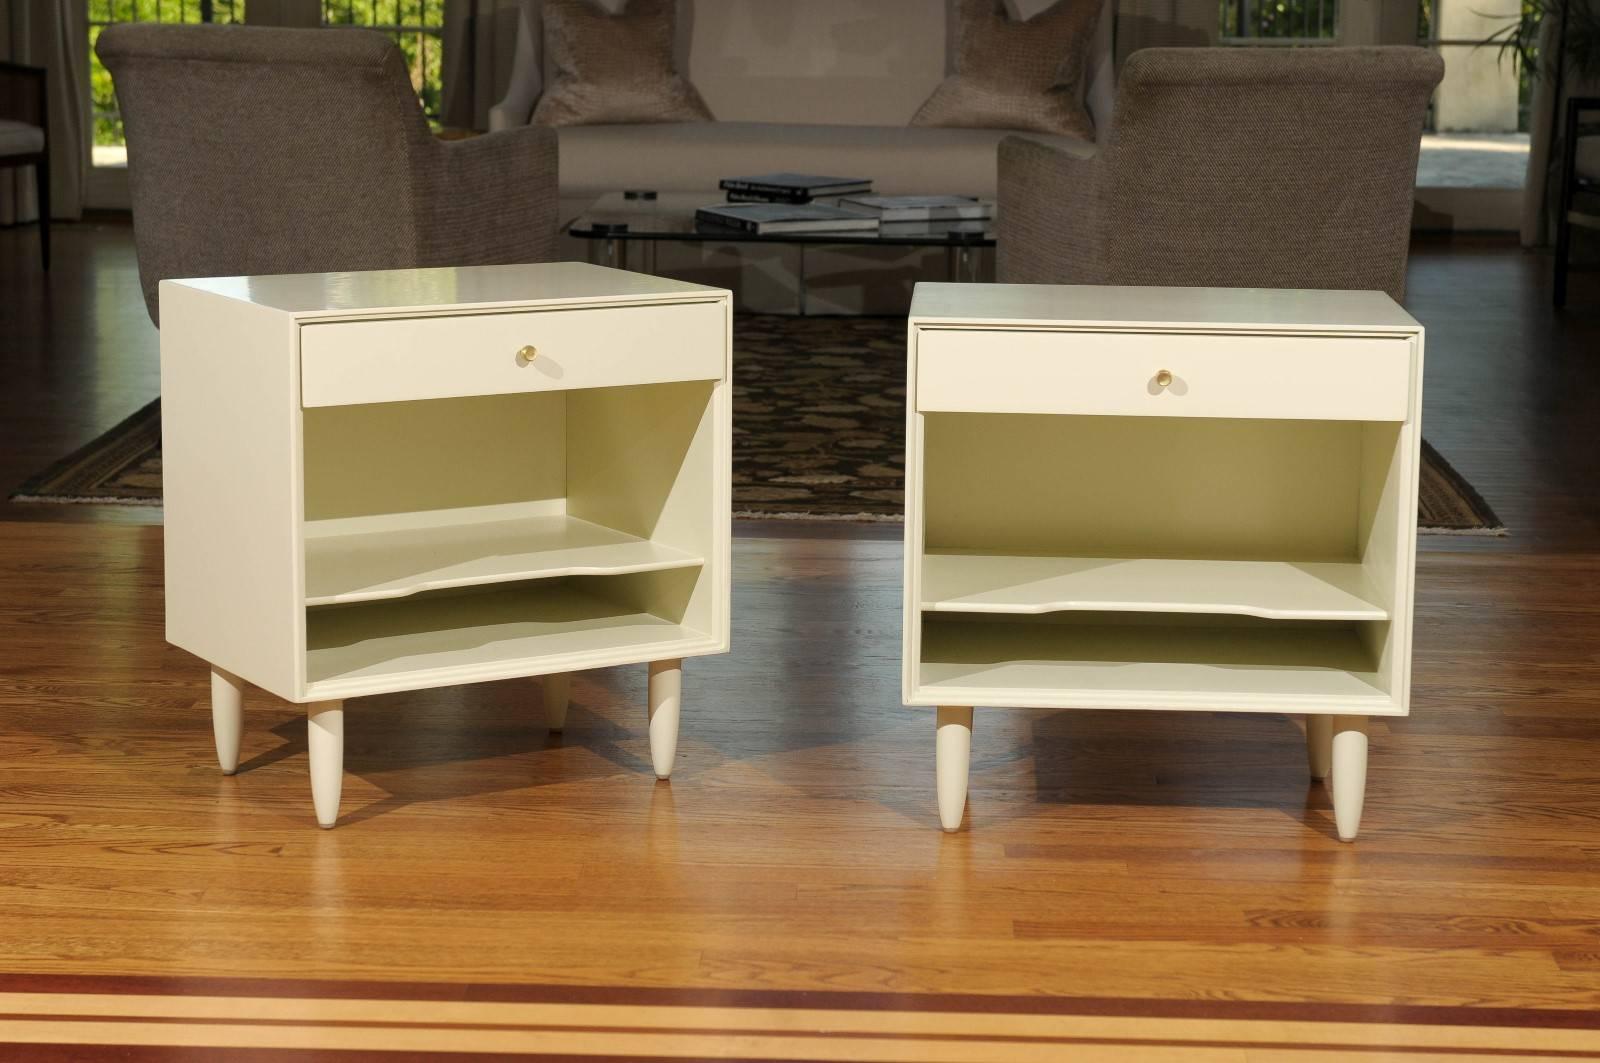 Beautiful pair of end tables or nightstands by John Stuart, circa 1965. Expertly crafted mahogany case construction with great form and detail. Fabulous jewelry! Excellent restored condition. The tables have undergone a meticulous restoration,